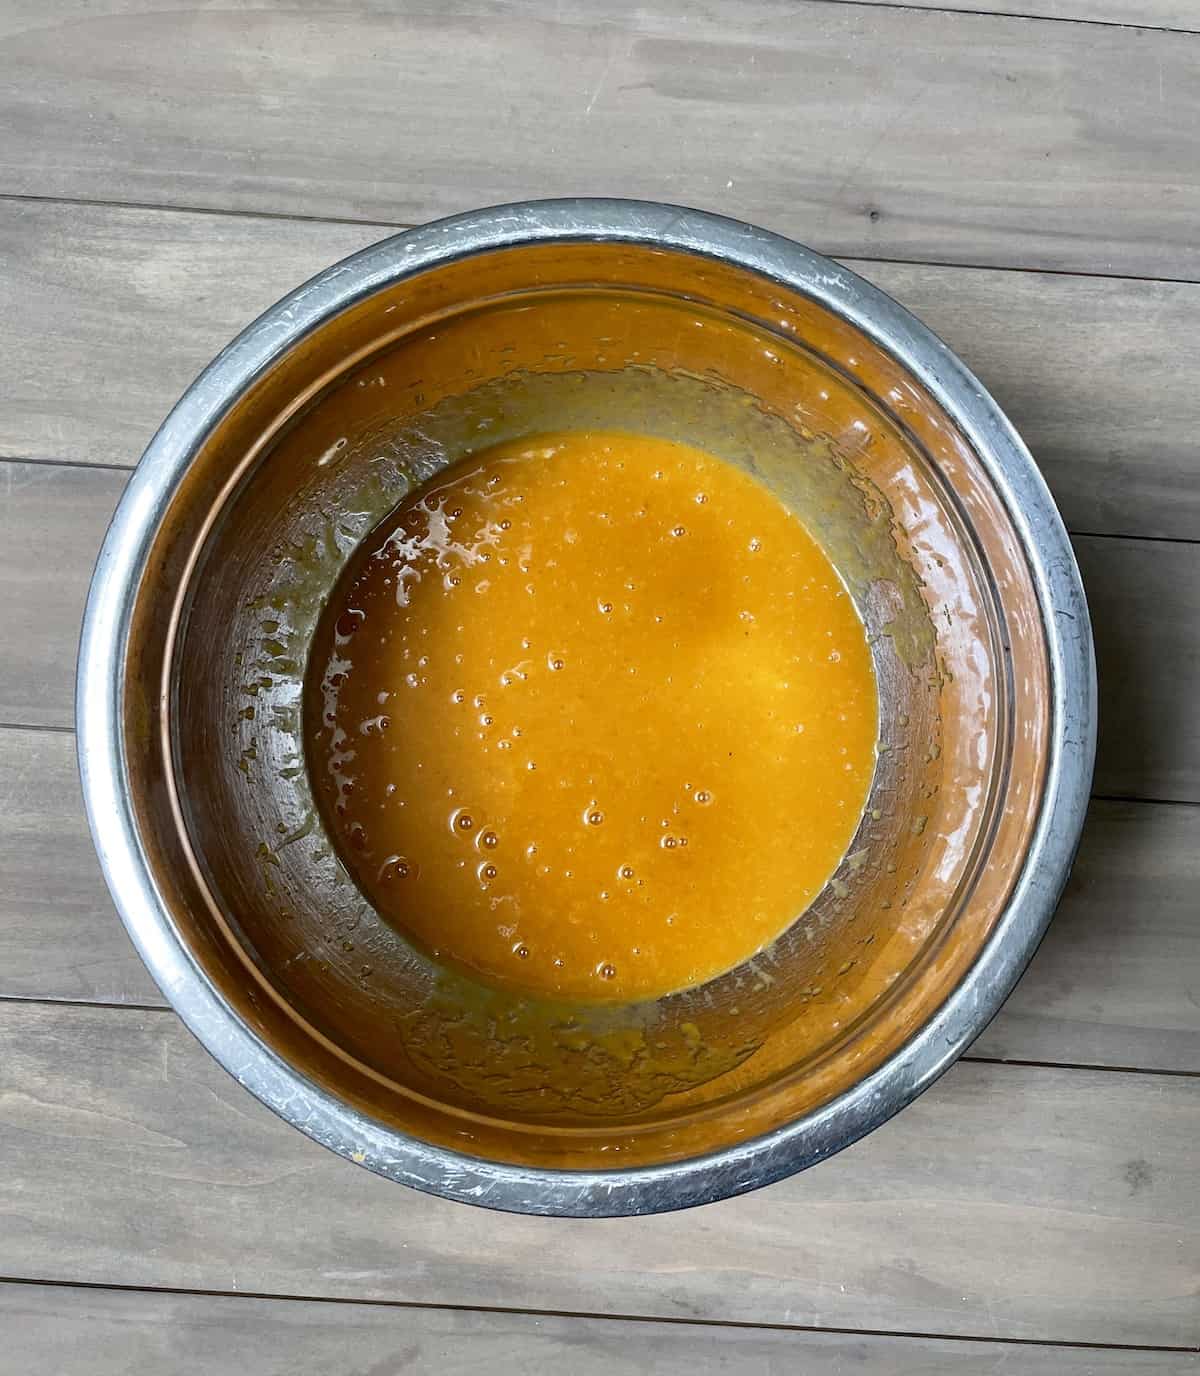 Pumpkin cake mix in stainless bowl.